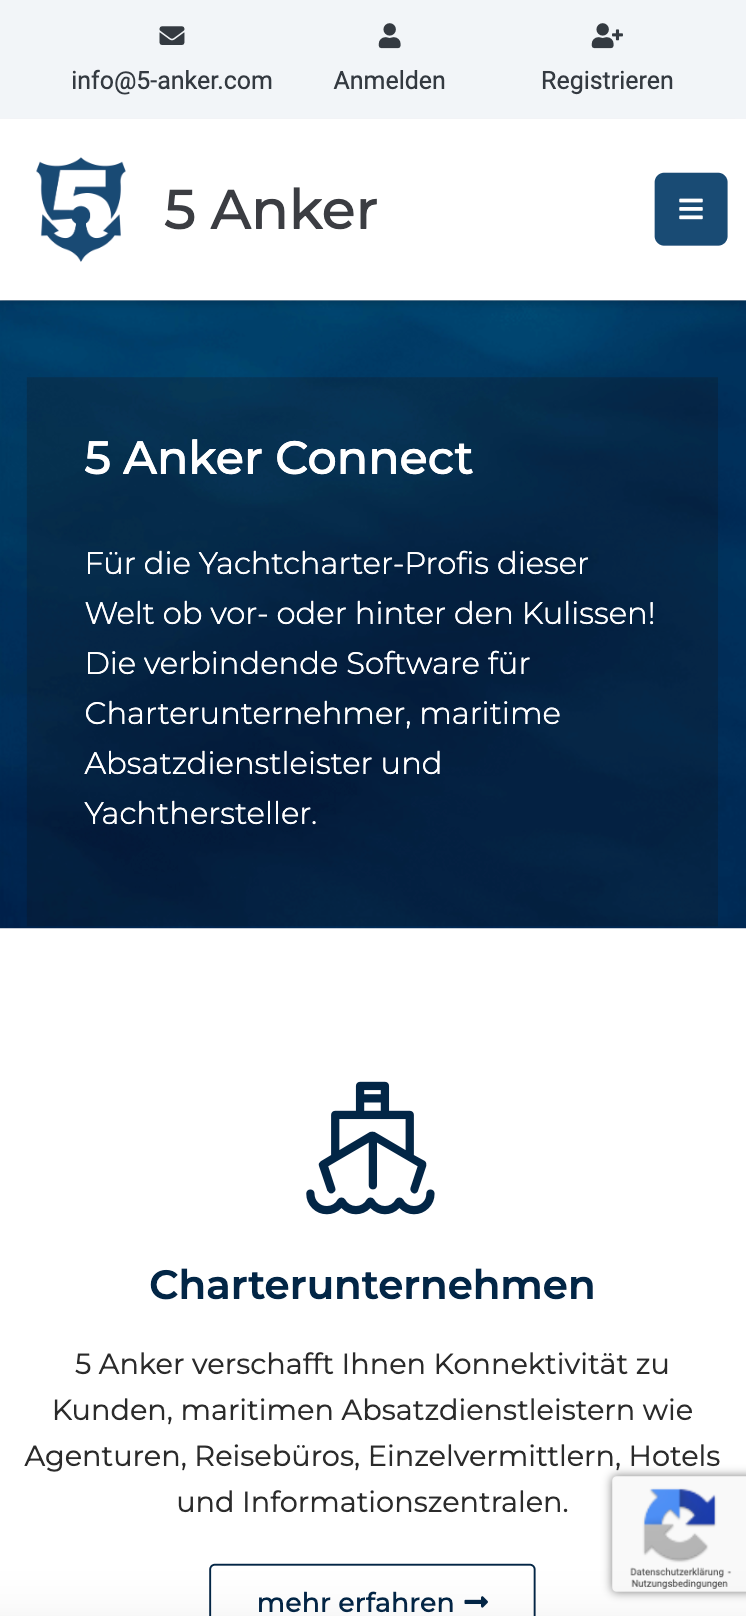 5 Anker Connect